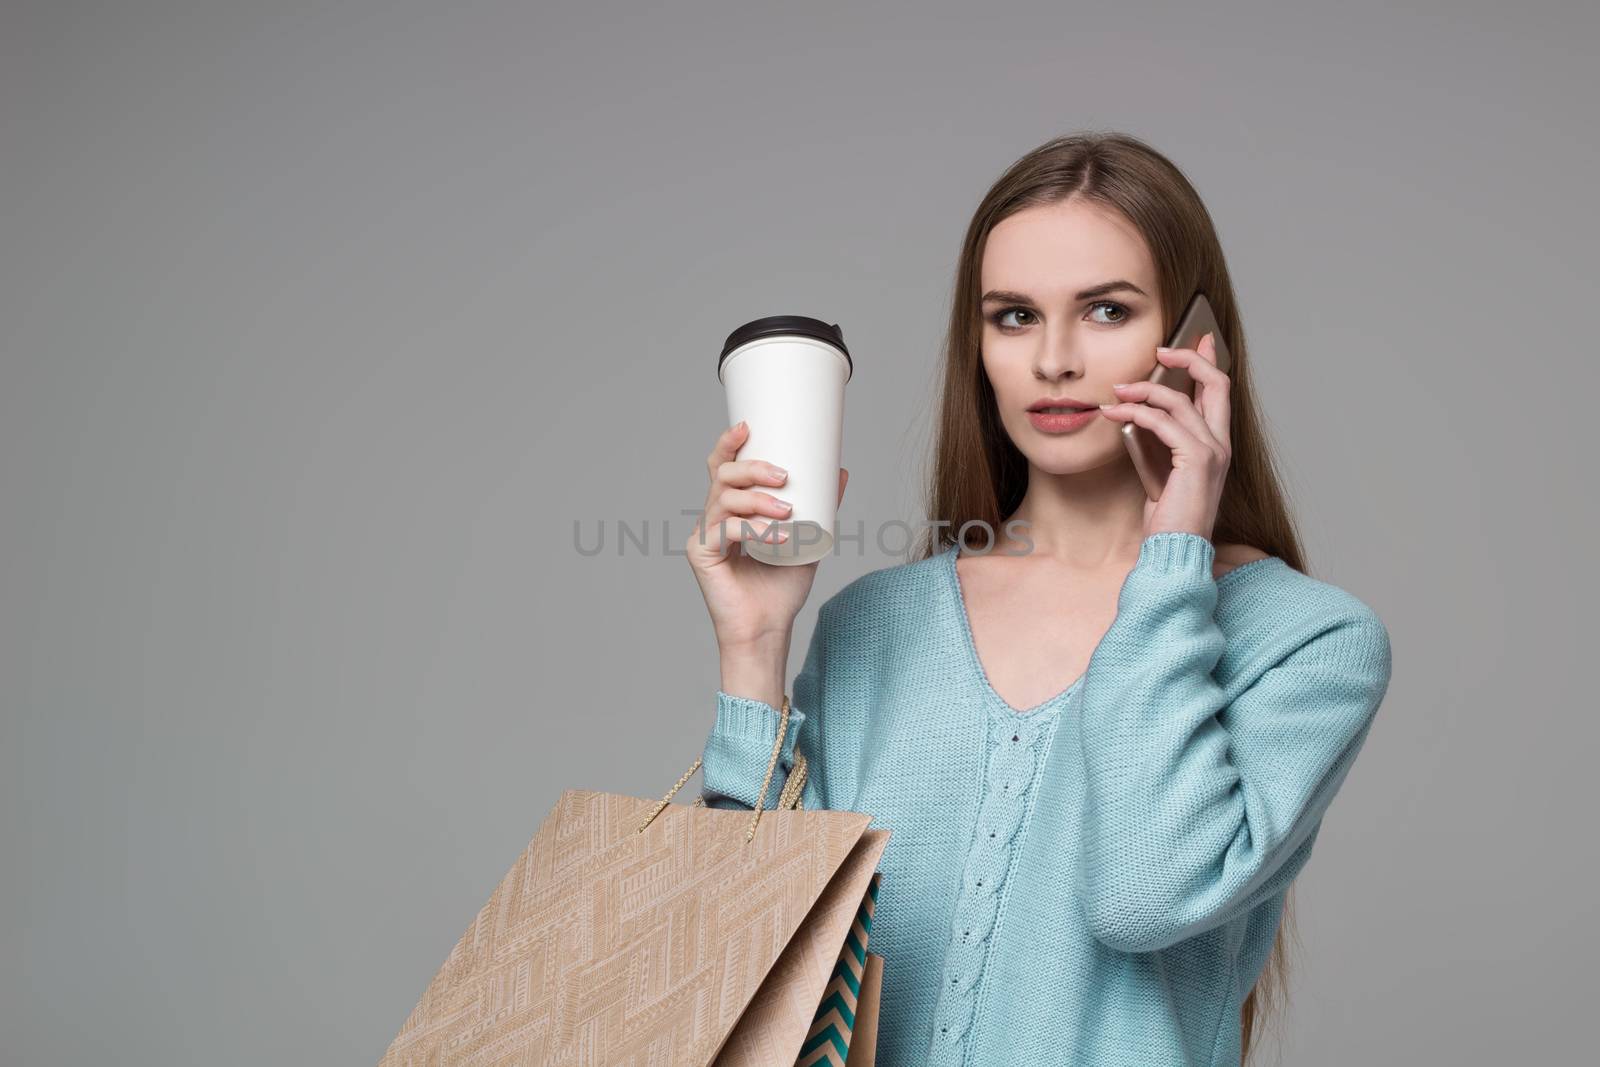 Girl in aquamarine with bags drinking coffee talks by smartphone by VeraVerano